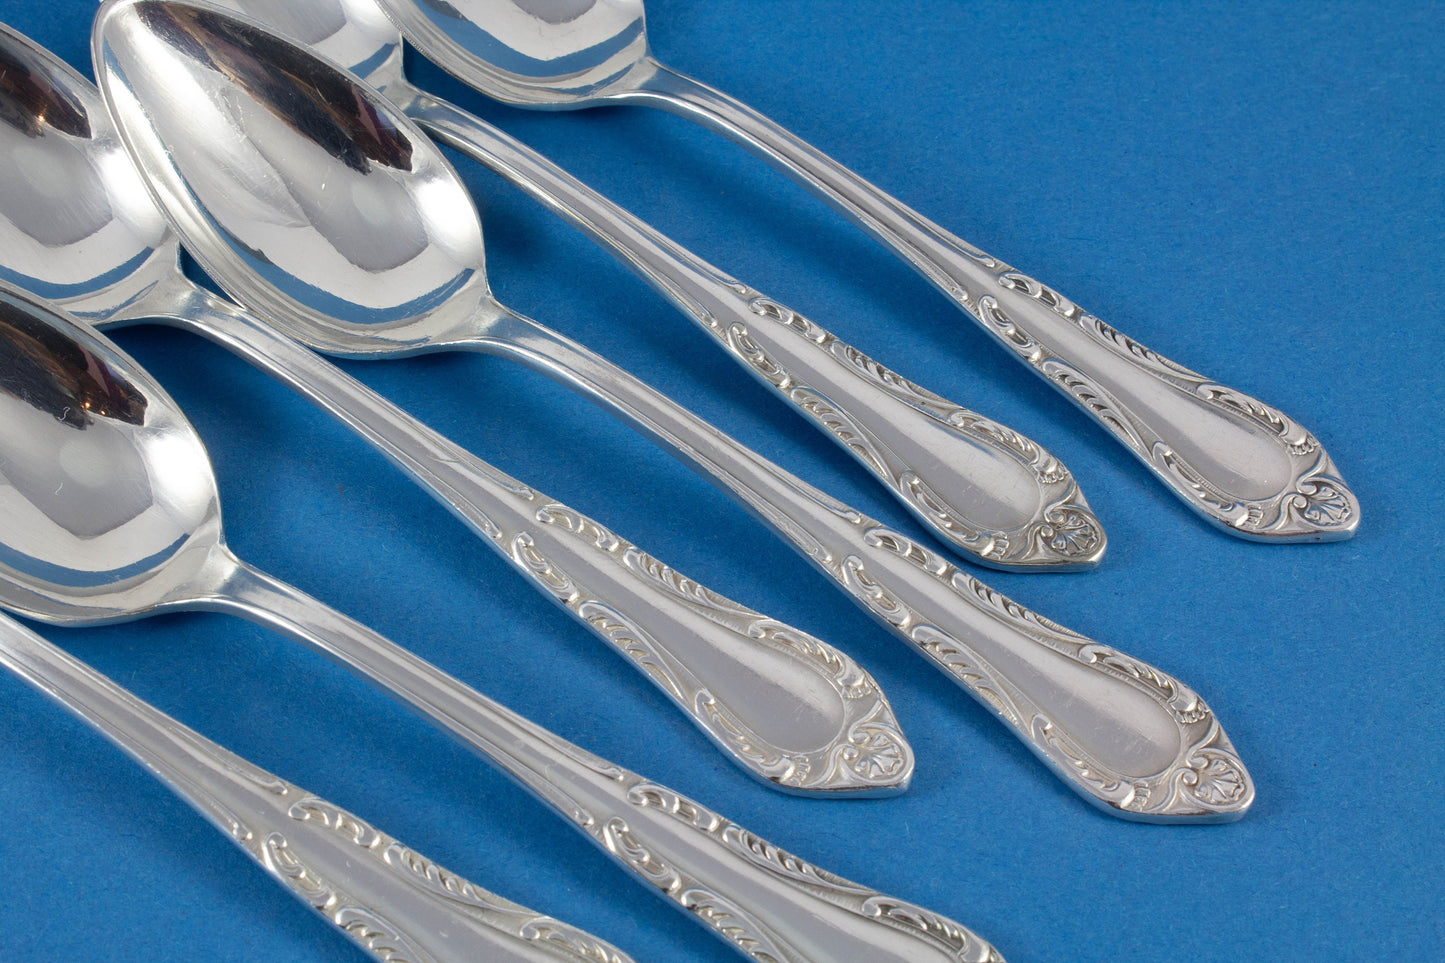 6 silver-plated teaspoons in Art Nouveau style